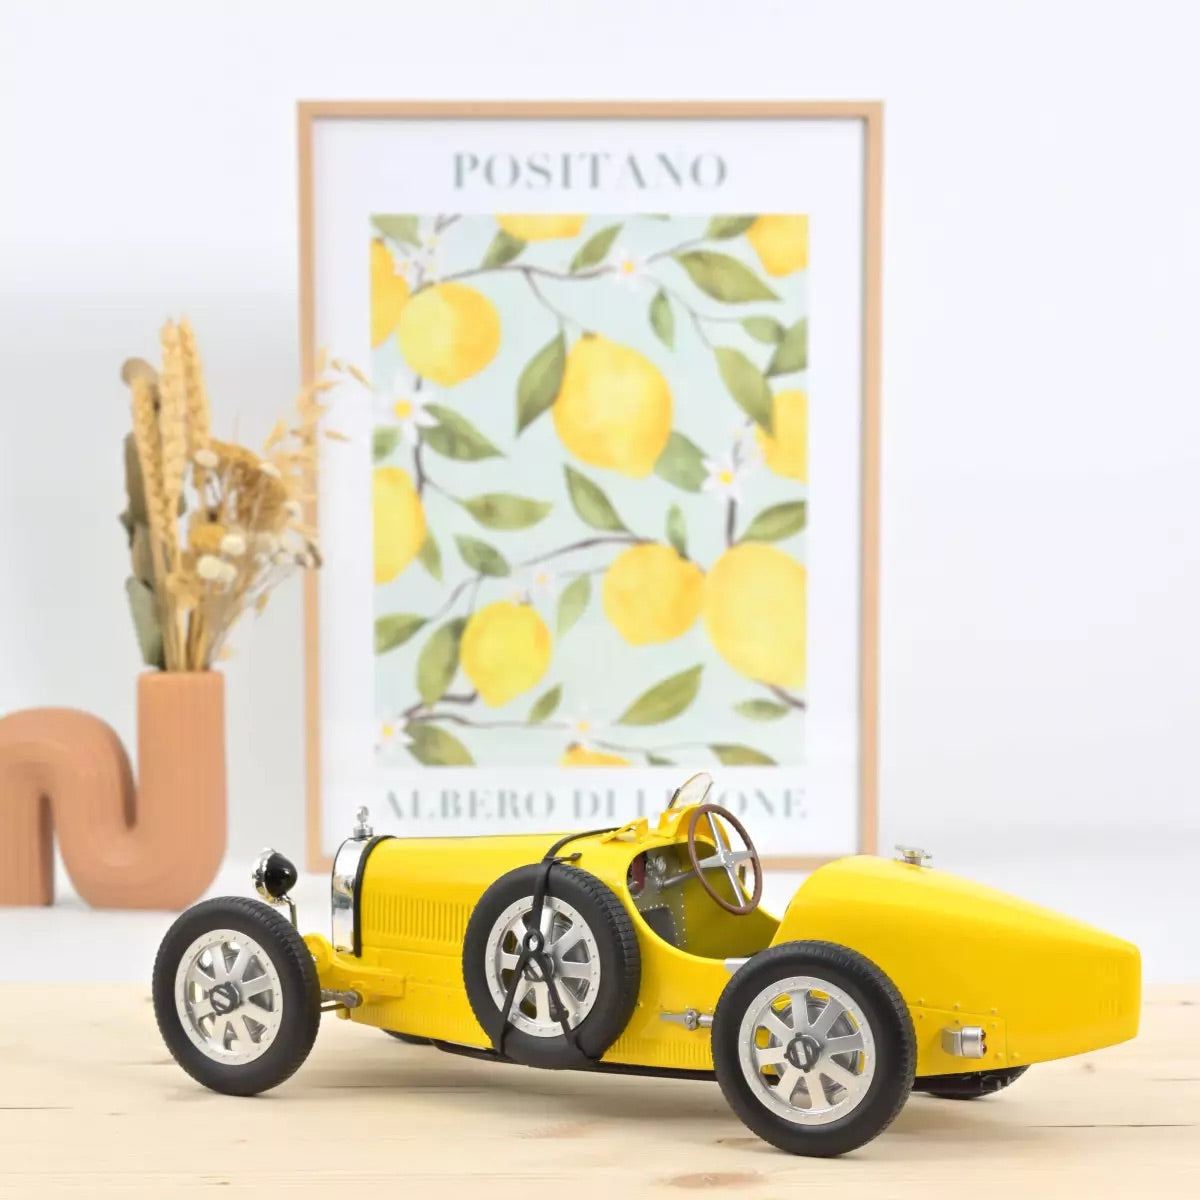 Norev 1:12 Bugatti T35 1925 - Yellow (Only 300 Made!)